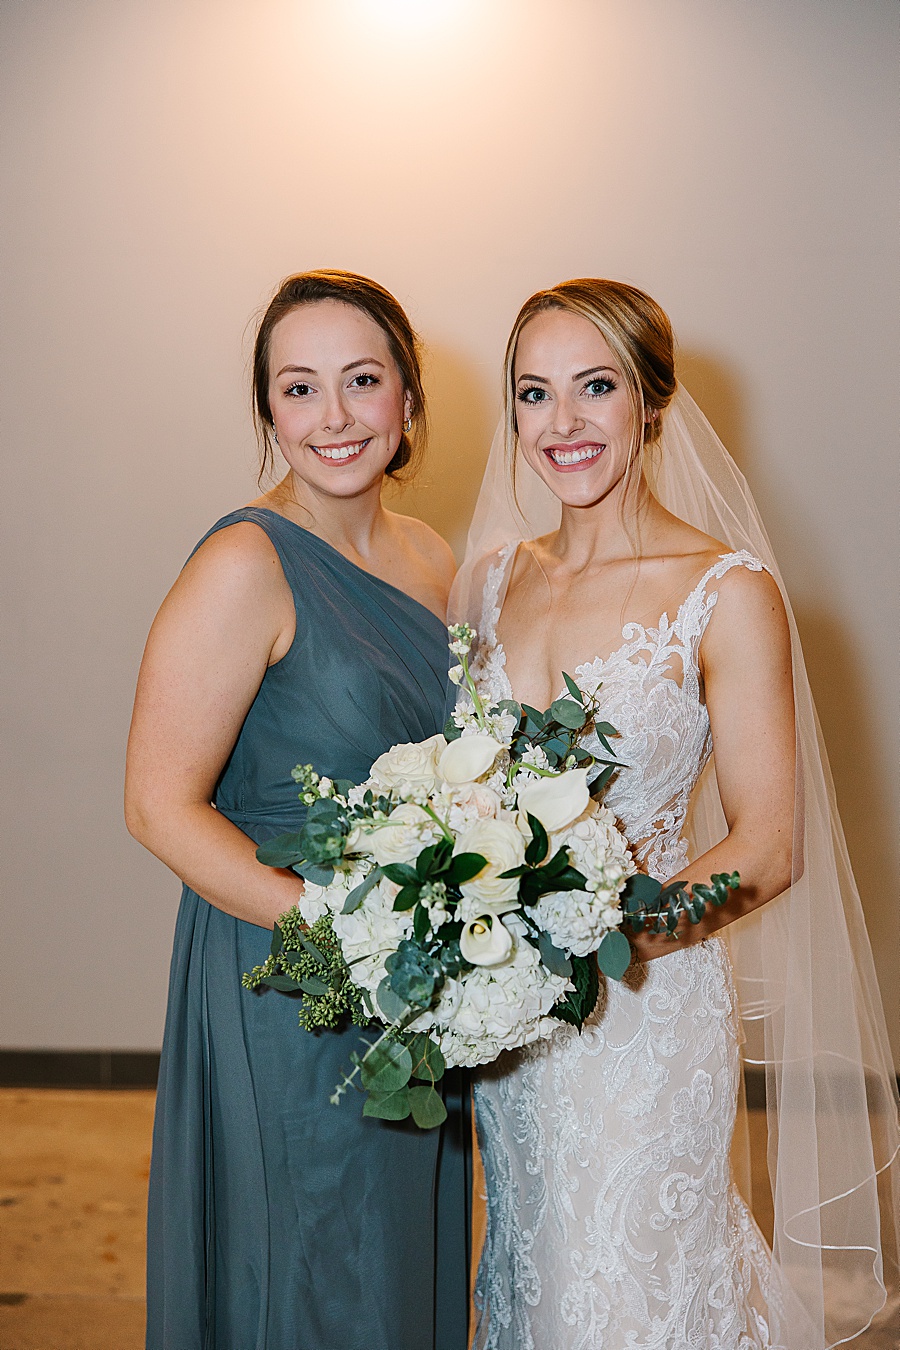 Bride and sister portrait at Jackson Terminal in Knoxville TN by Mandy Hart Photo, Knoxville TN Wedding Photographer